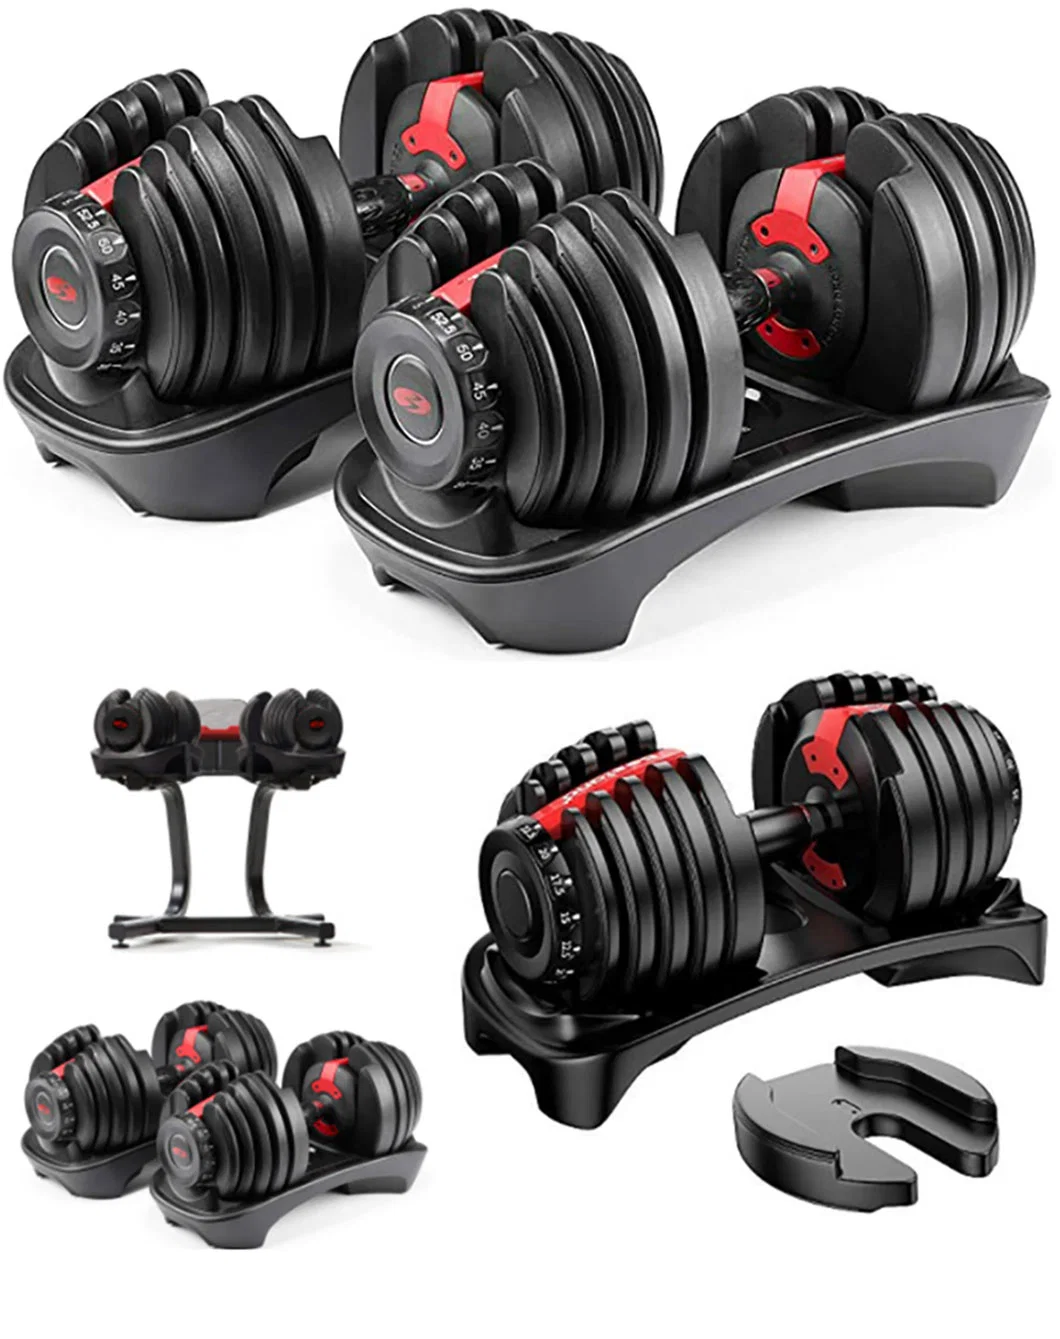 Pair of 50 Pound Steel Full Iron Dumbbells for Home Gym Exercise Workout Adjustable Free Weights